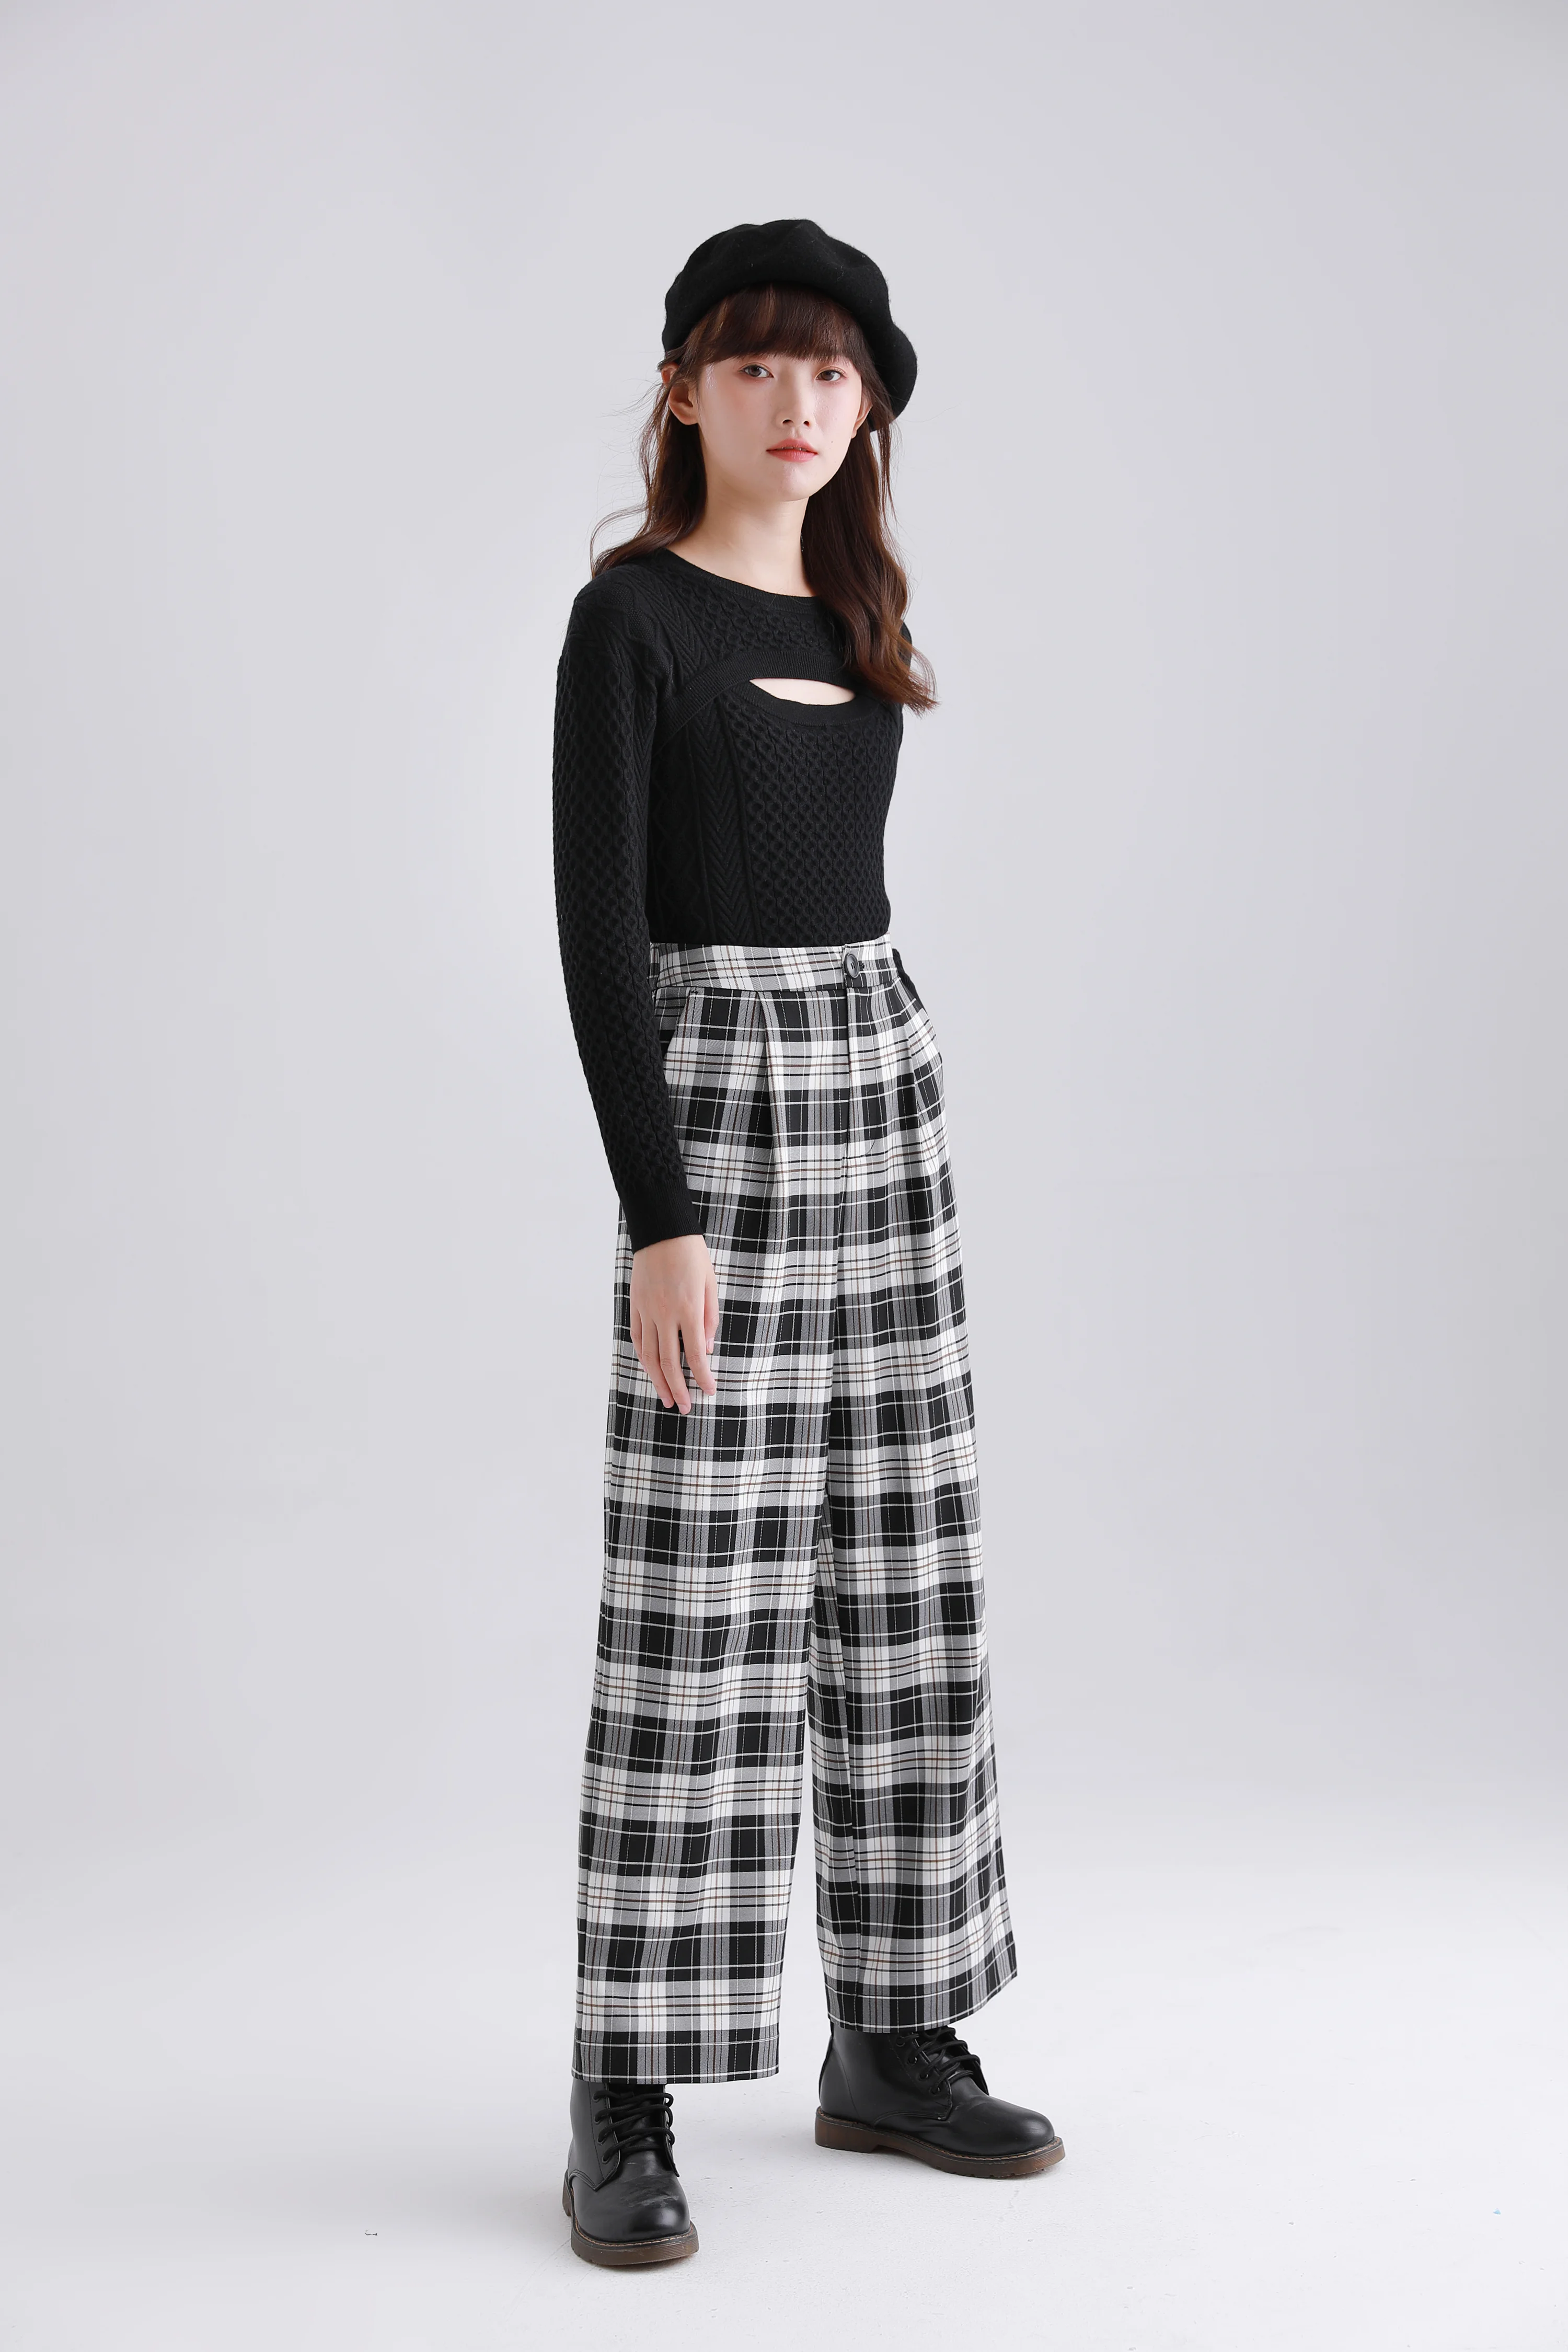 topk422-cut-out-cable-pullover-hkd-399-panw135-checked-pants-hkd-499